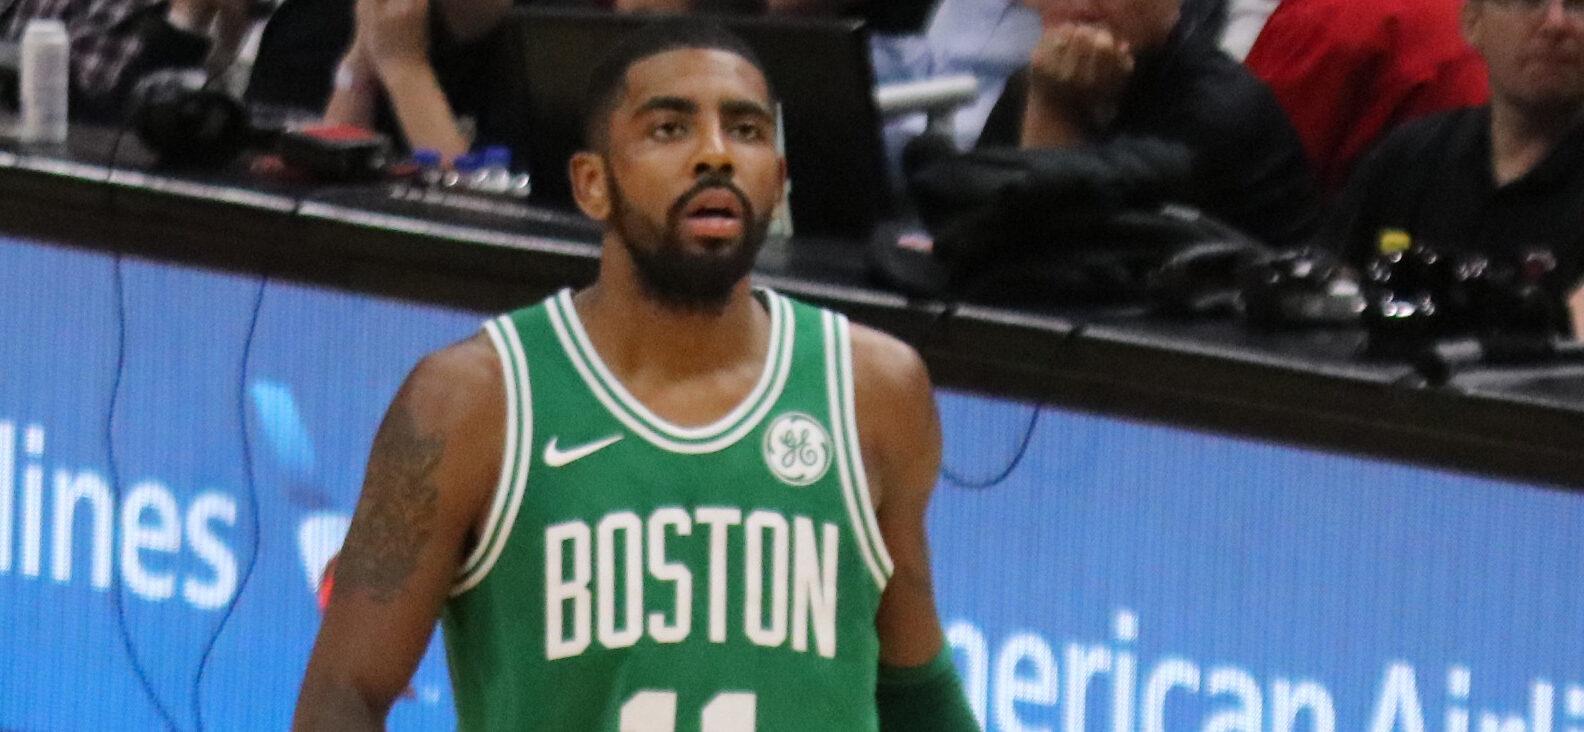 Kyrie Irving leaving Boston Celtics and will join Kevin Durant on the Brooklyn Nets